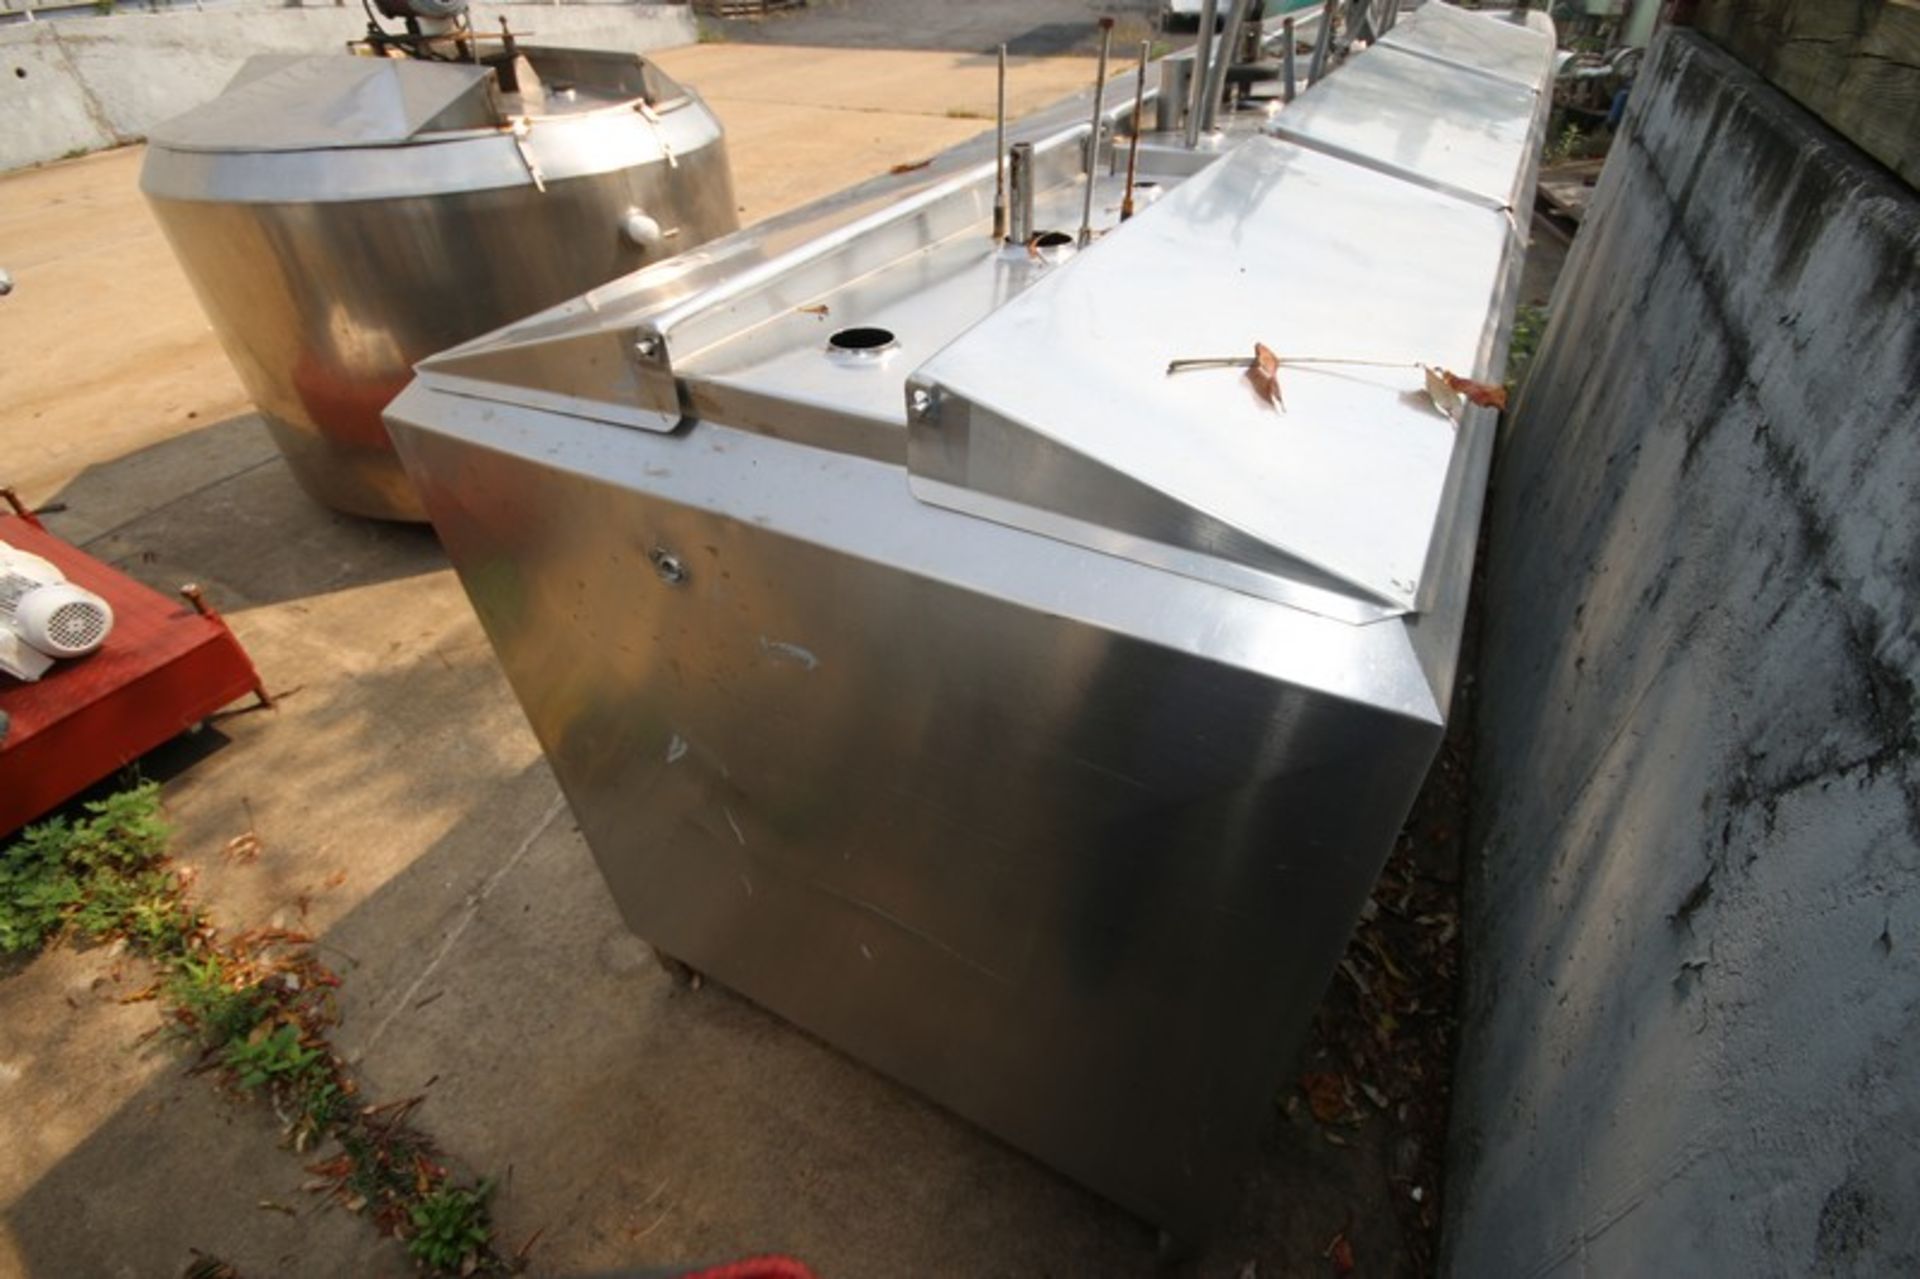 3 Compartment @ Aprox. 50 Gallon, S/S Insulated Flavor Tank, with Lids, Includes Agitator Shafts, - Image 4 of 8